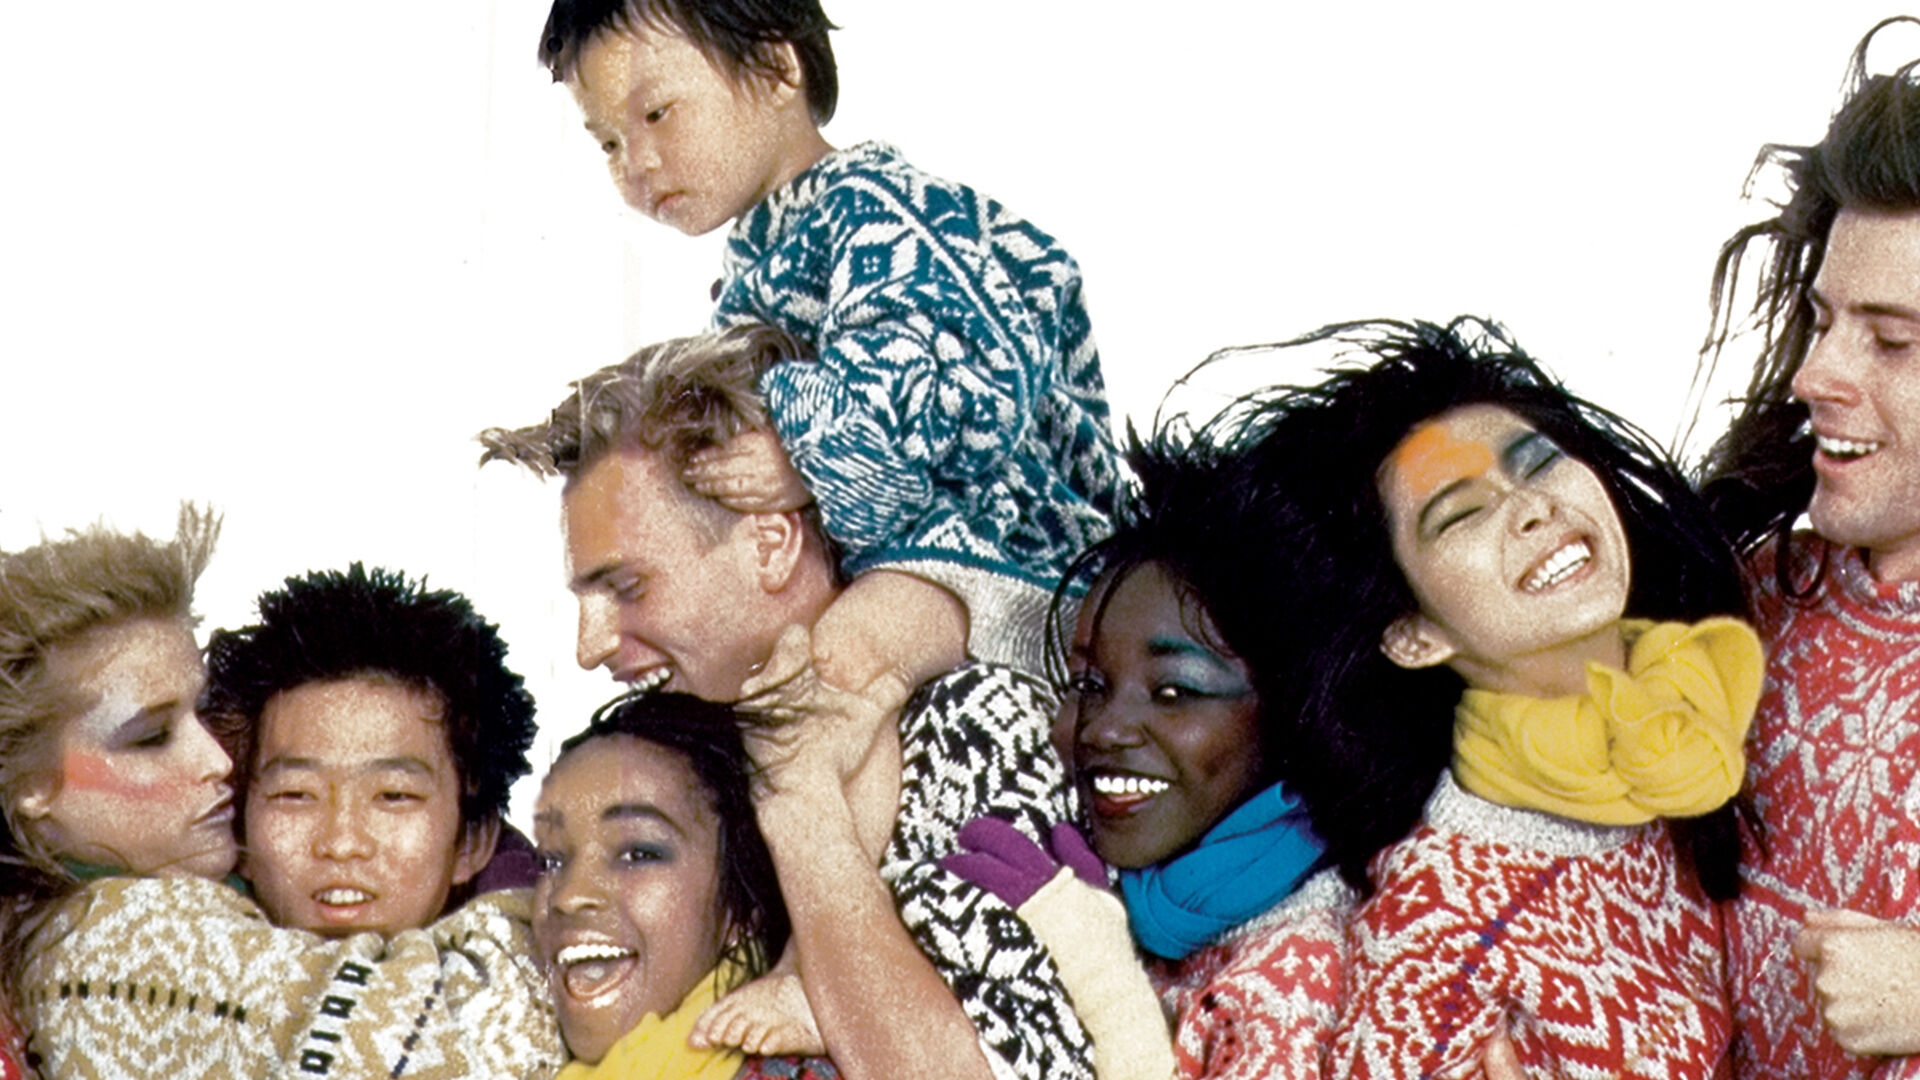 The United Colors of Benetton Campaign history